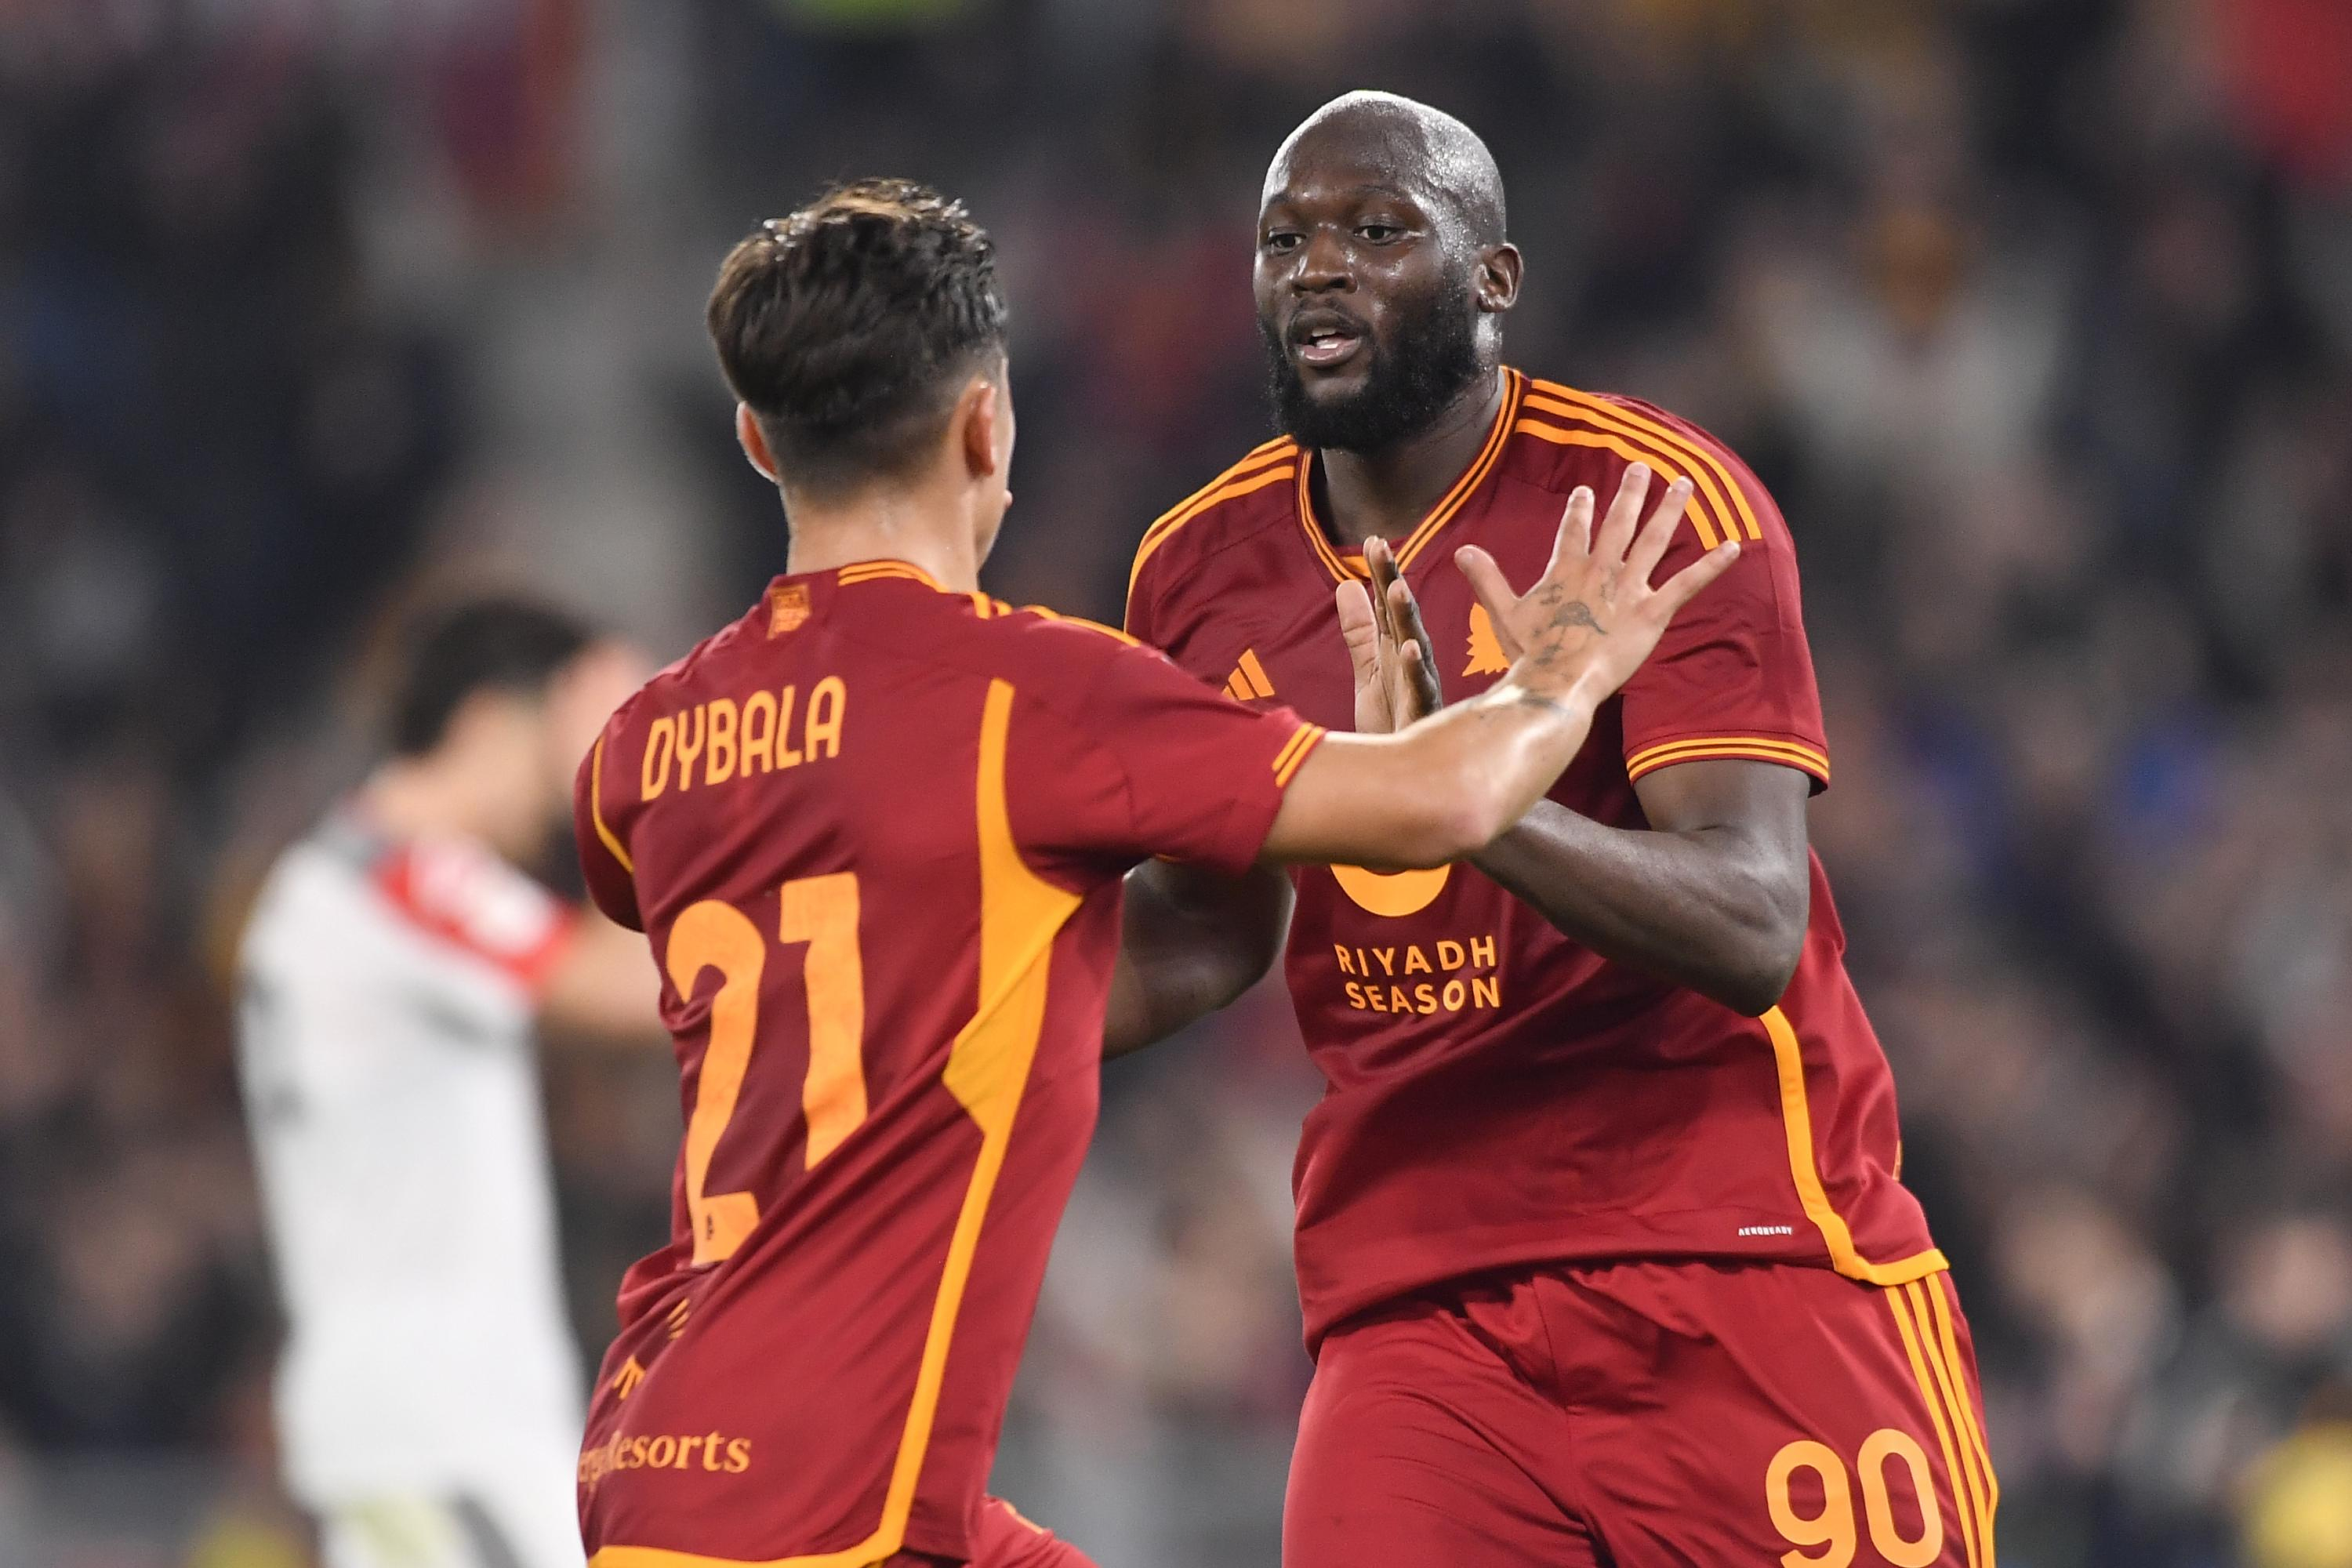 Italian Cup: AS Roma passes at the last minute